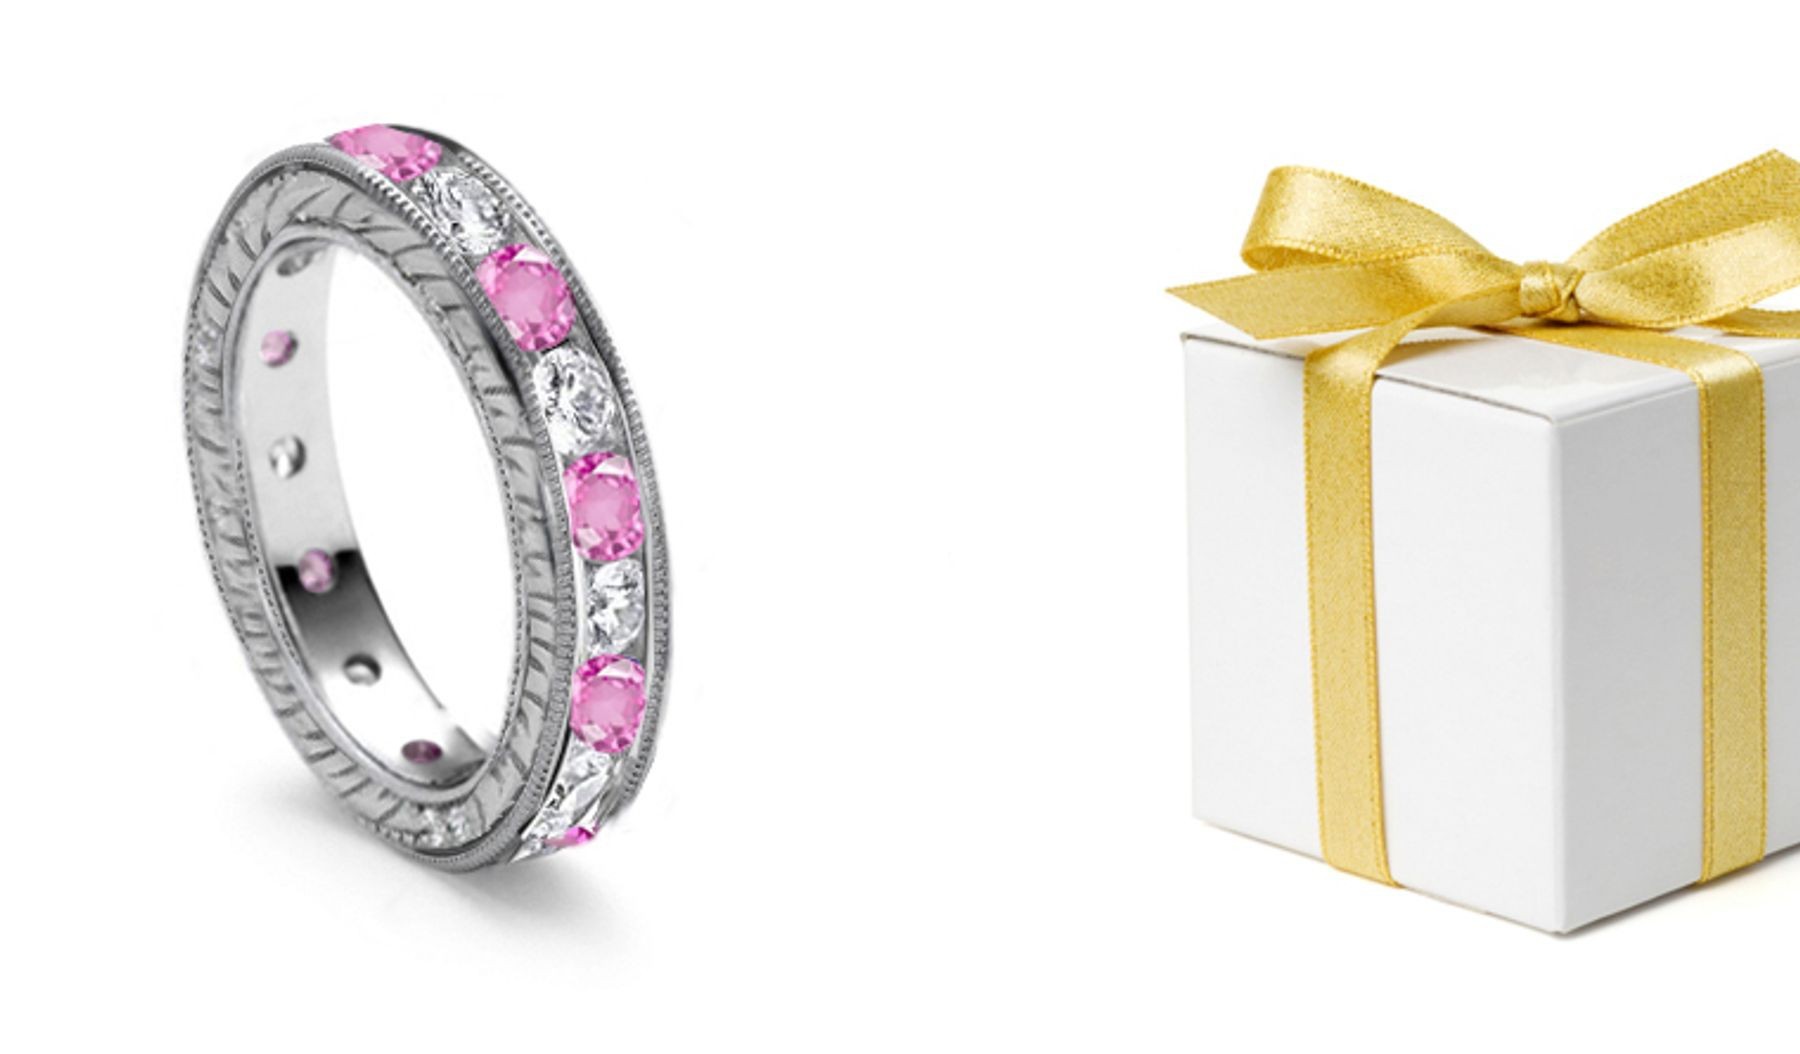 Passion of True Love: Diamond & Pink Sapphire Eternity Engraved Ring